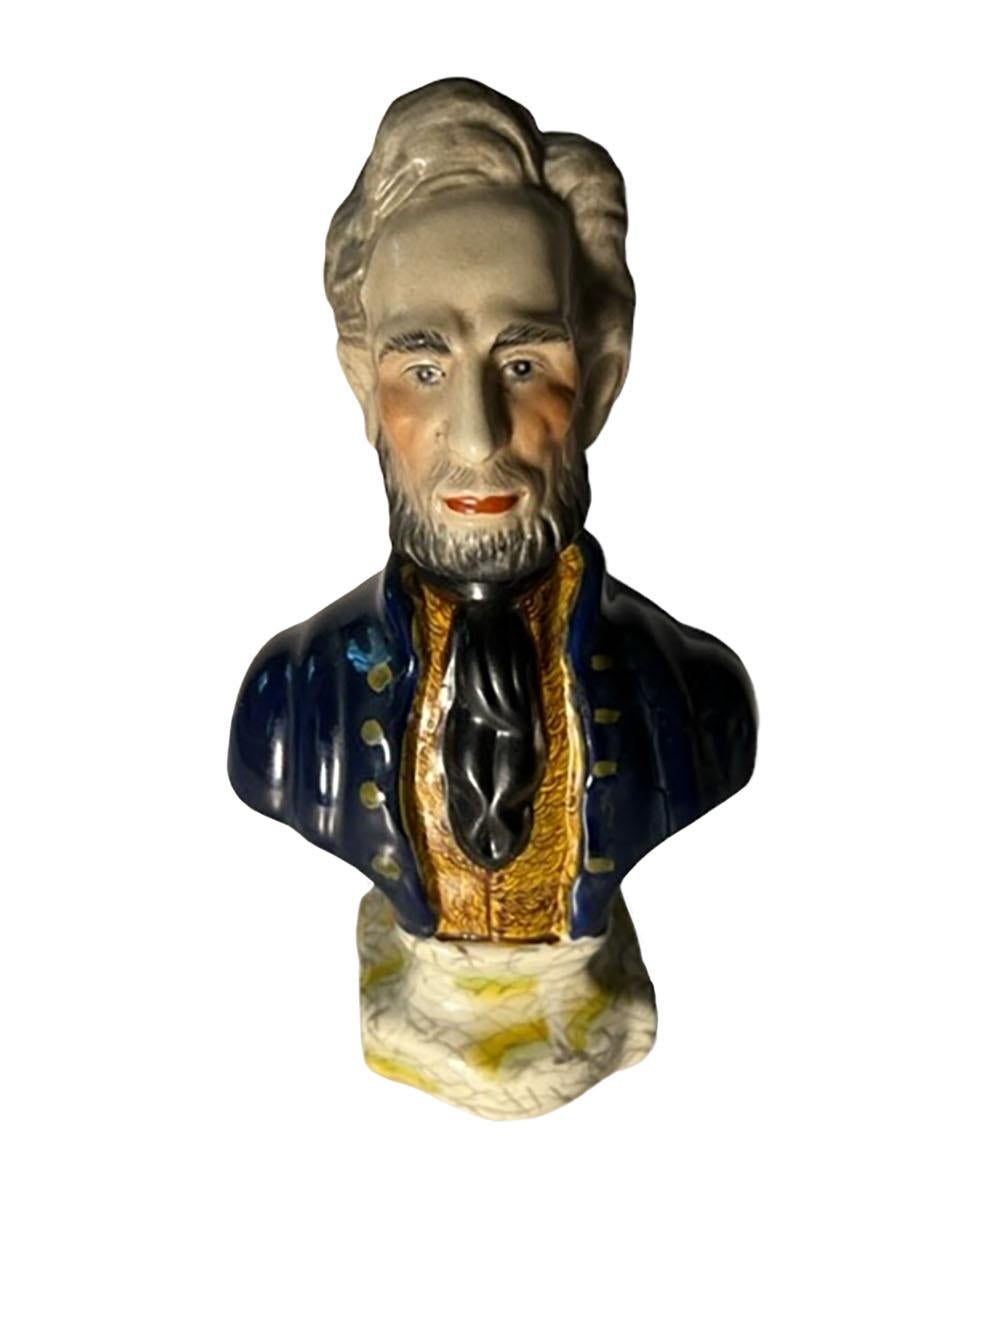 19th century Staffordshire pearlware bust of a country gentleman. English, circa 1870.
   